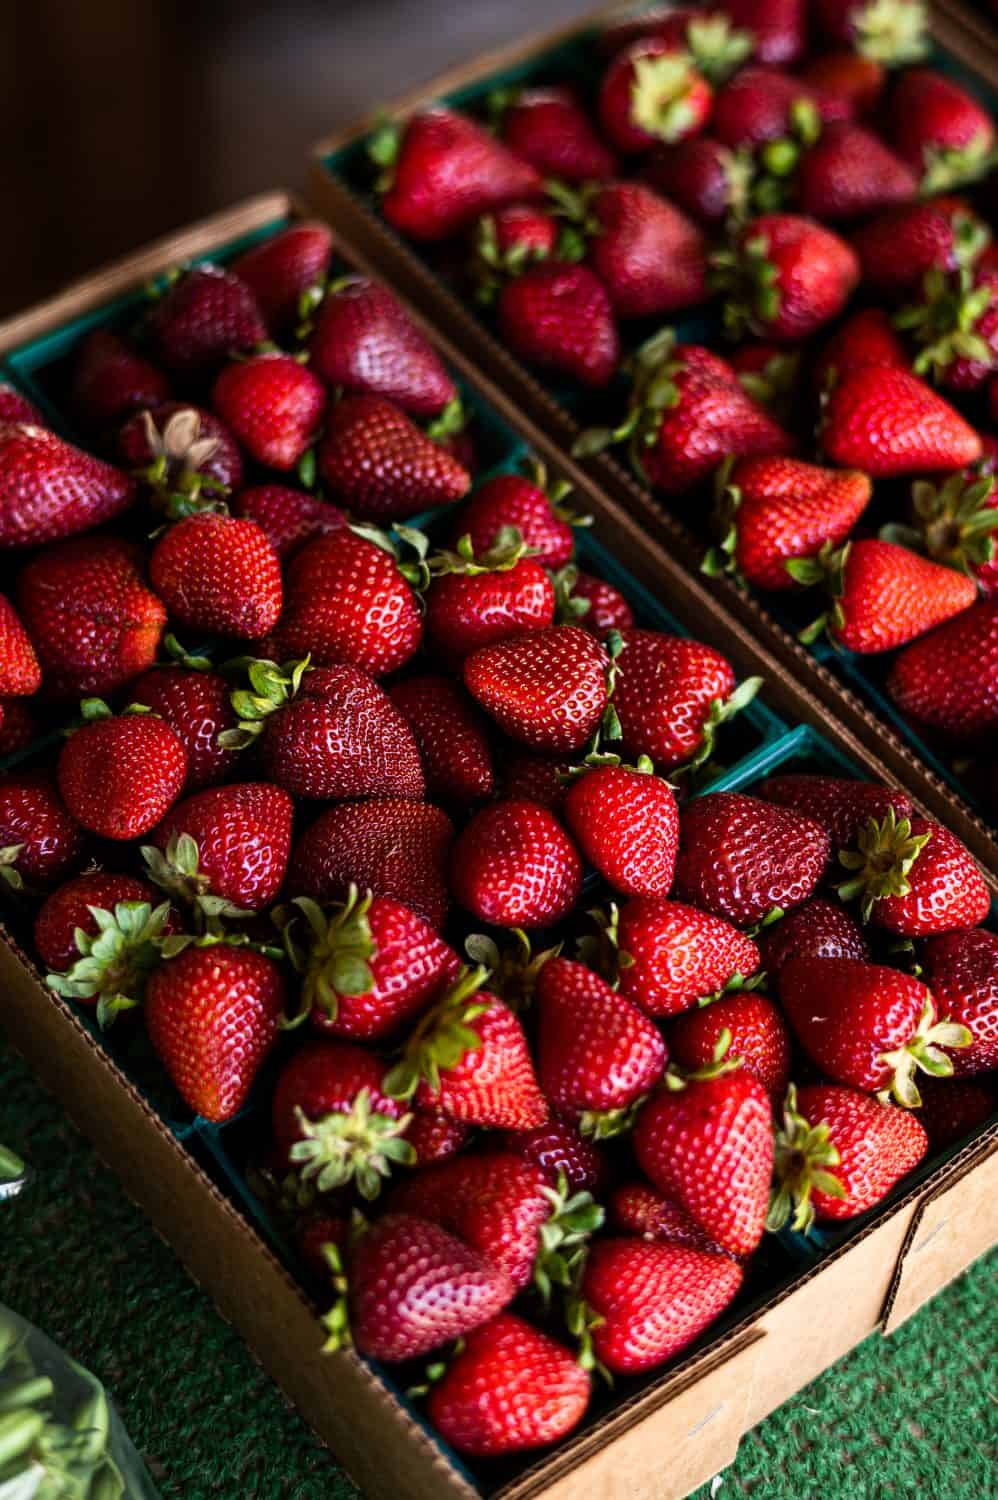 Crates of strawberries after being harvested.